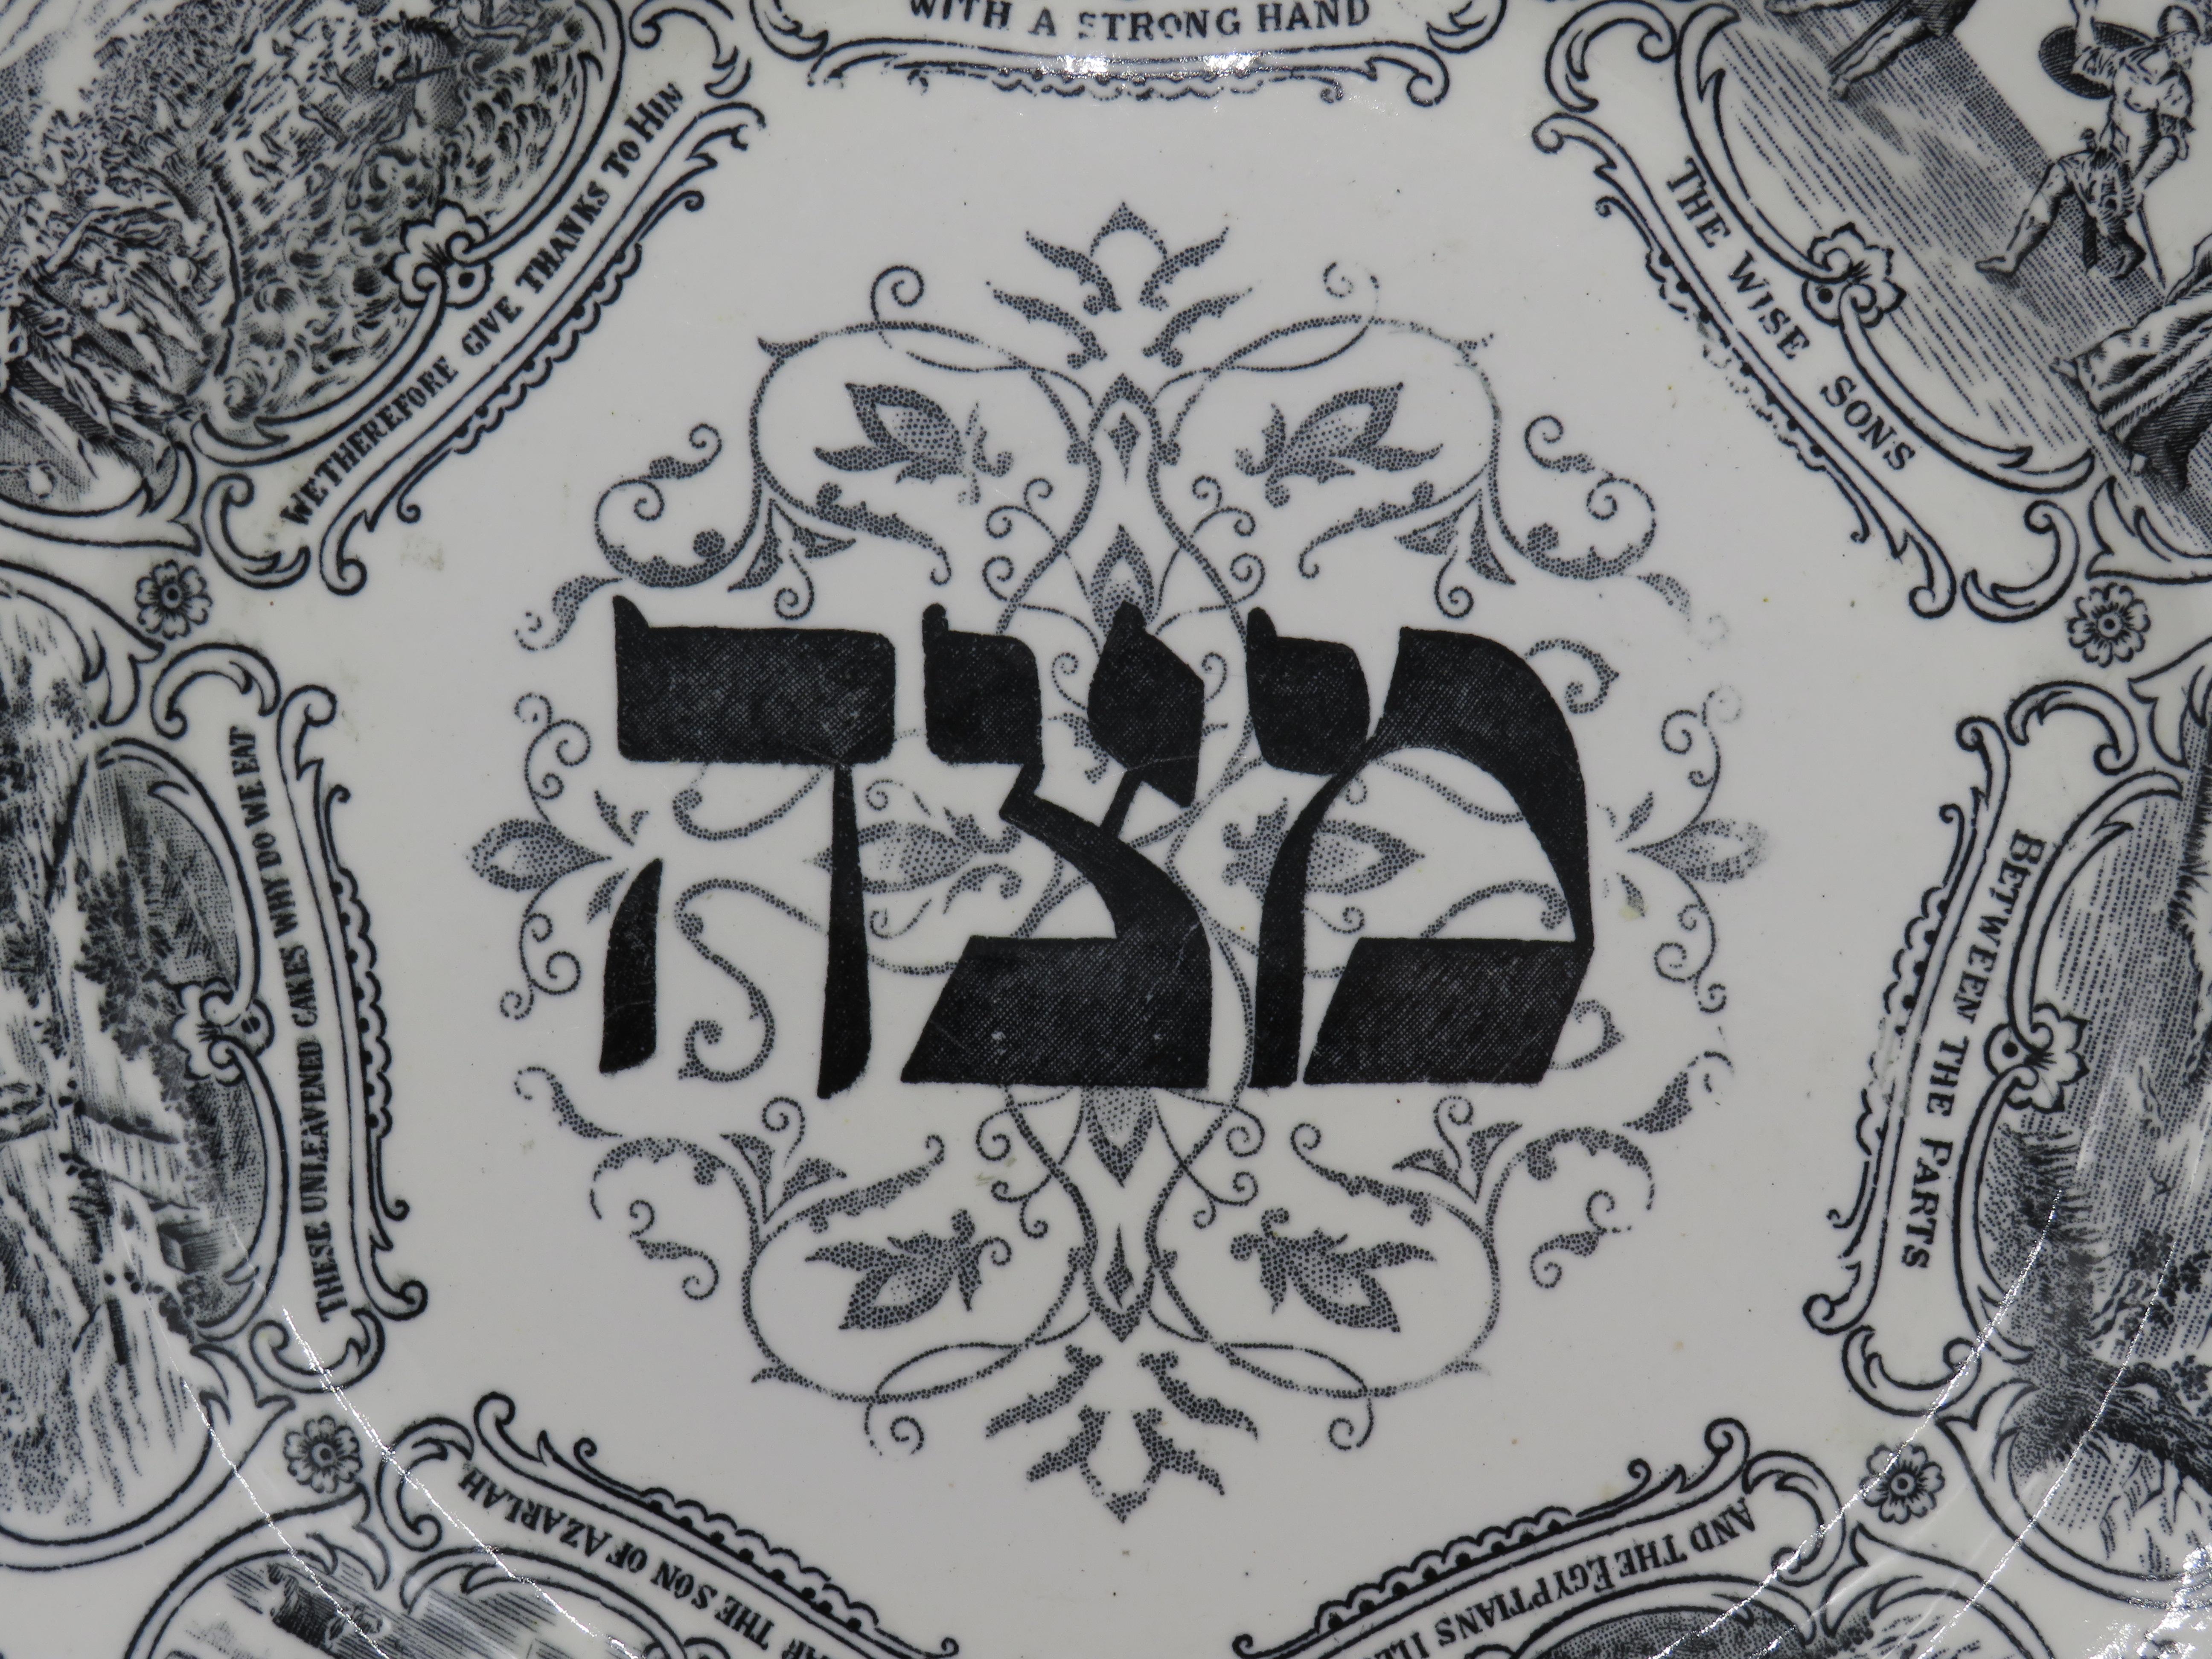 Black and white pottery Passover plate, by Ridgeways, Staffordshire, England, circa 1850.
With scenes from the Passover services in blue and text of the paragraph Ma-Nishtanah.
The word matzoh (matzah) in the center decorated all around with the